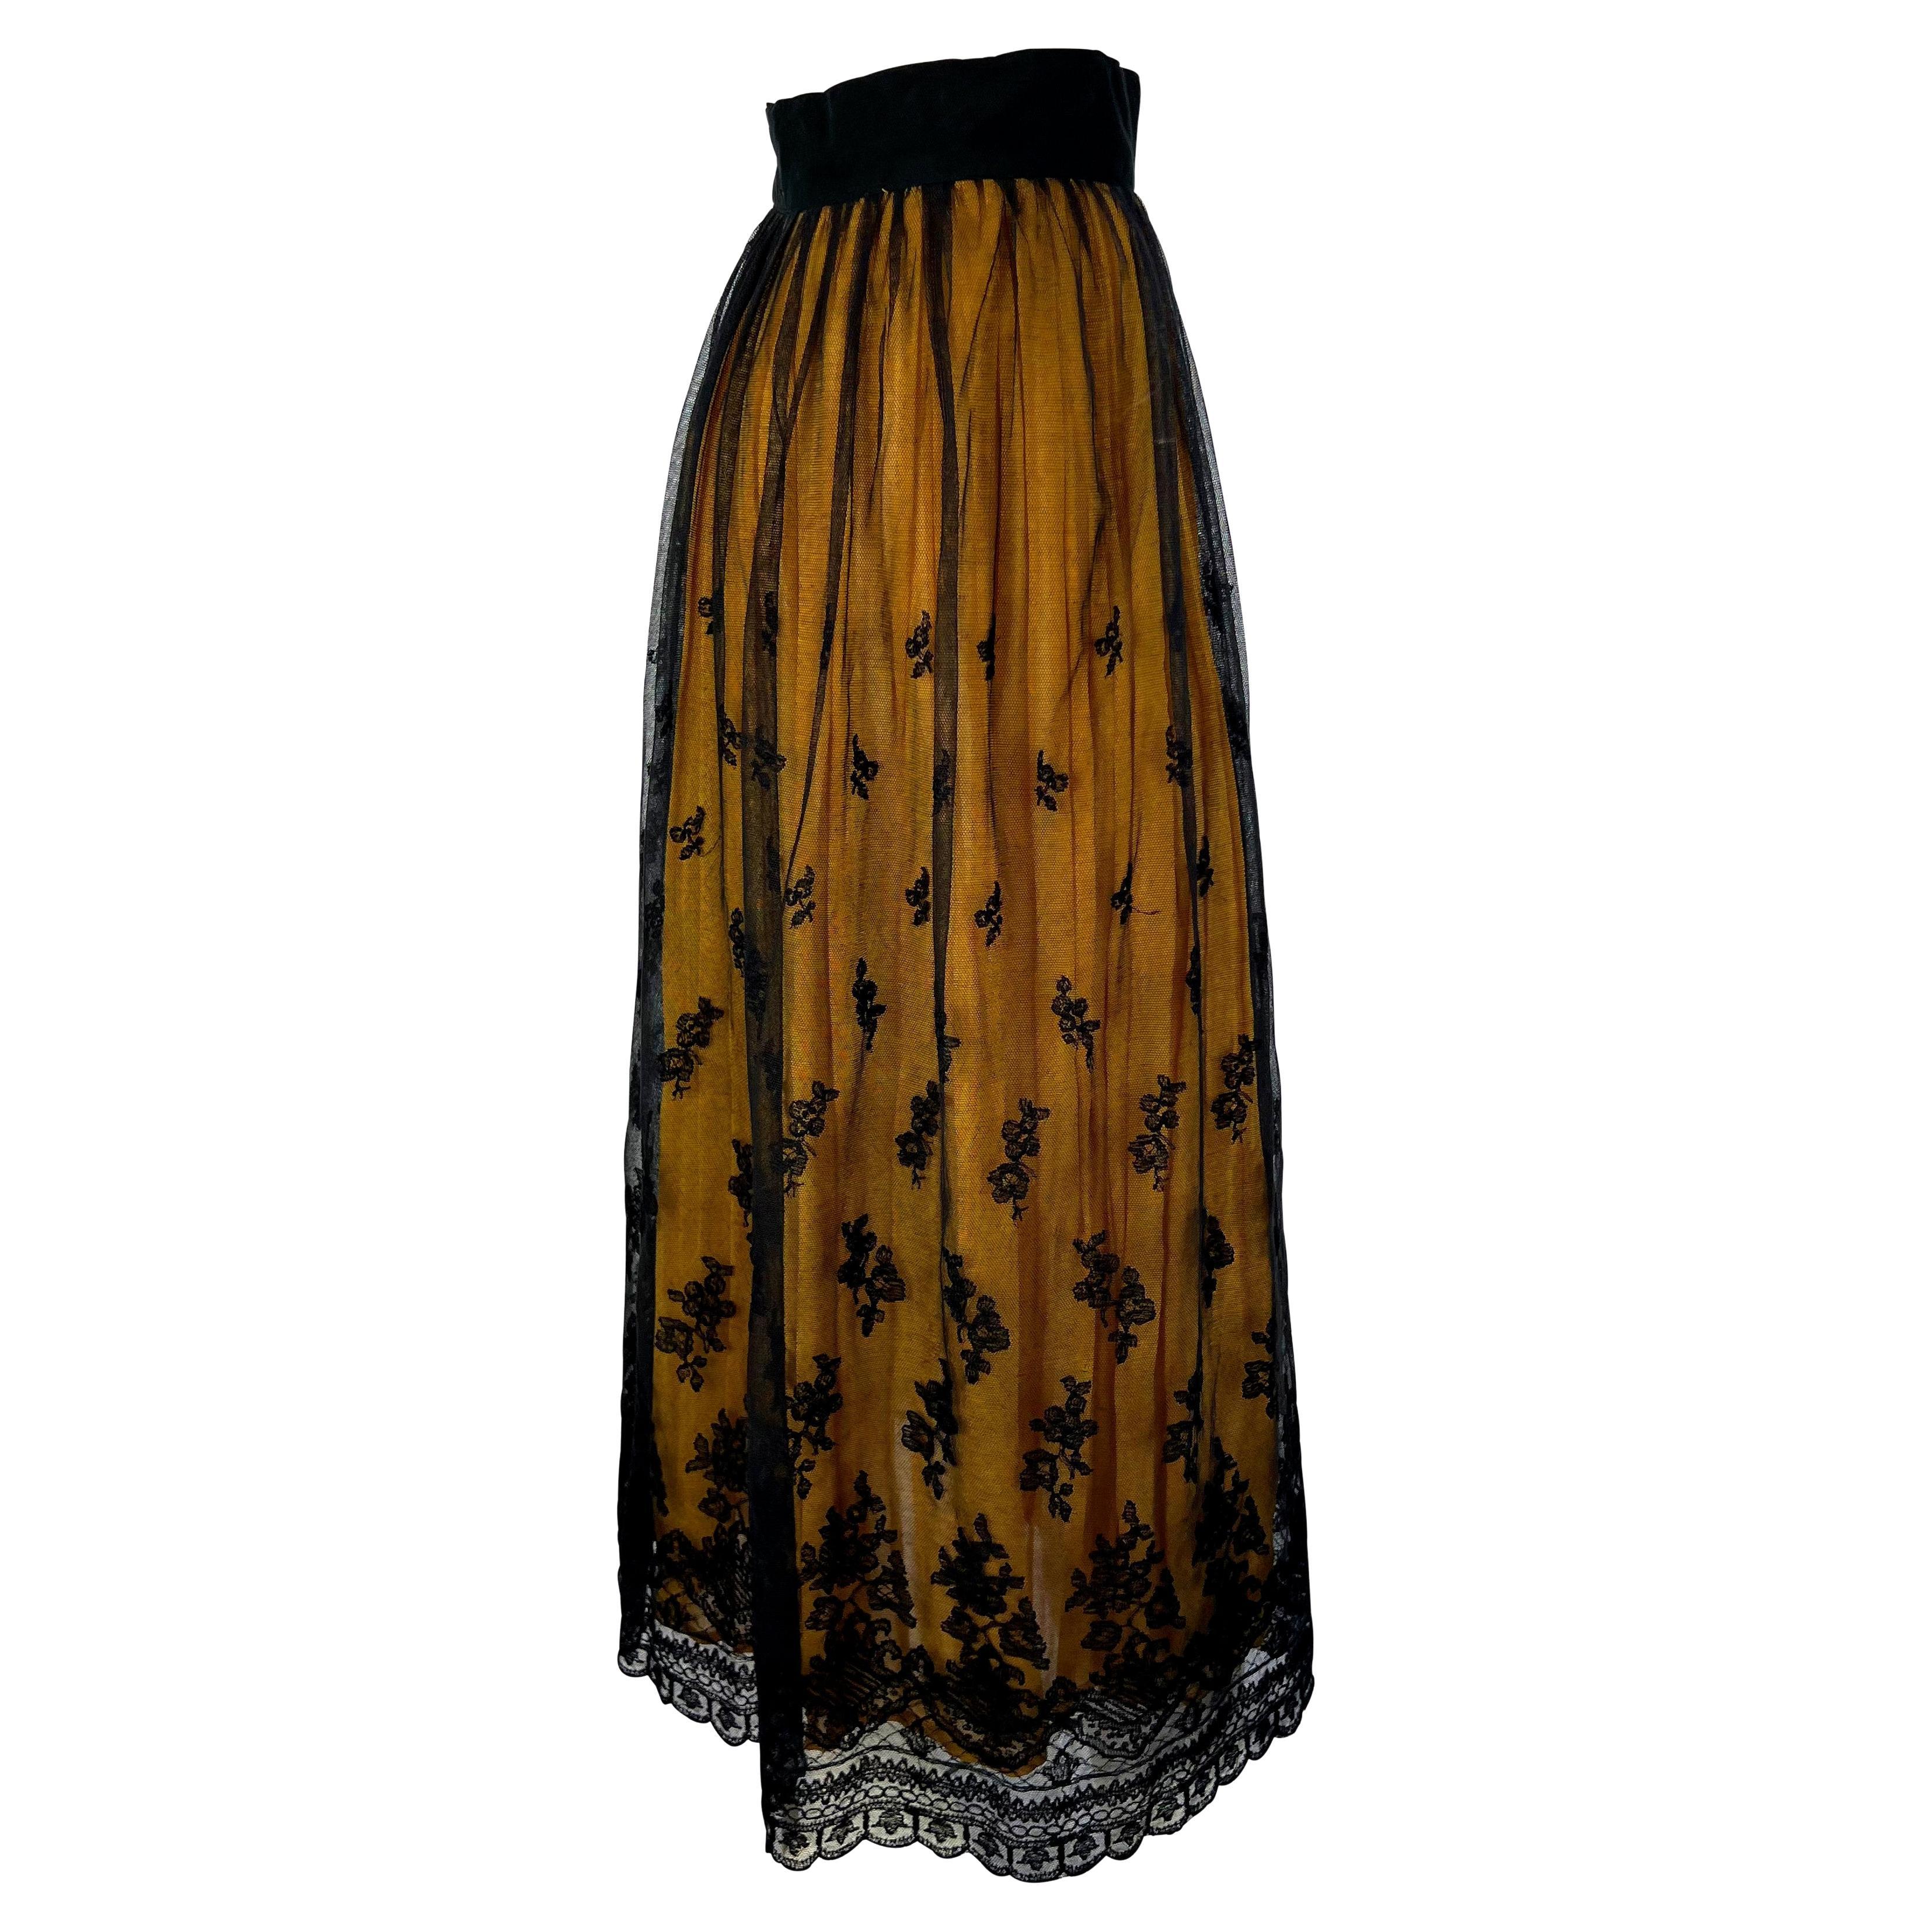 1990s Dolce & Gabbana Black Lace Overlay Yellow Sheer Flared Maxi Skirt In Good Condition For Sale In West Hollywood, CA